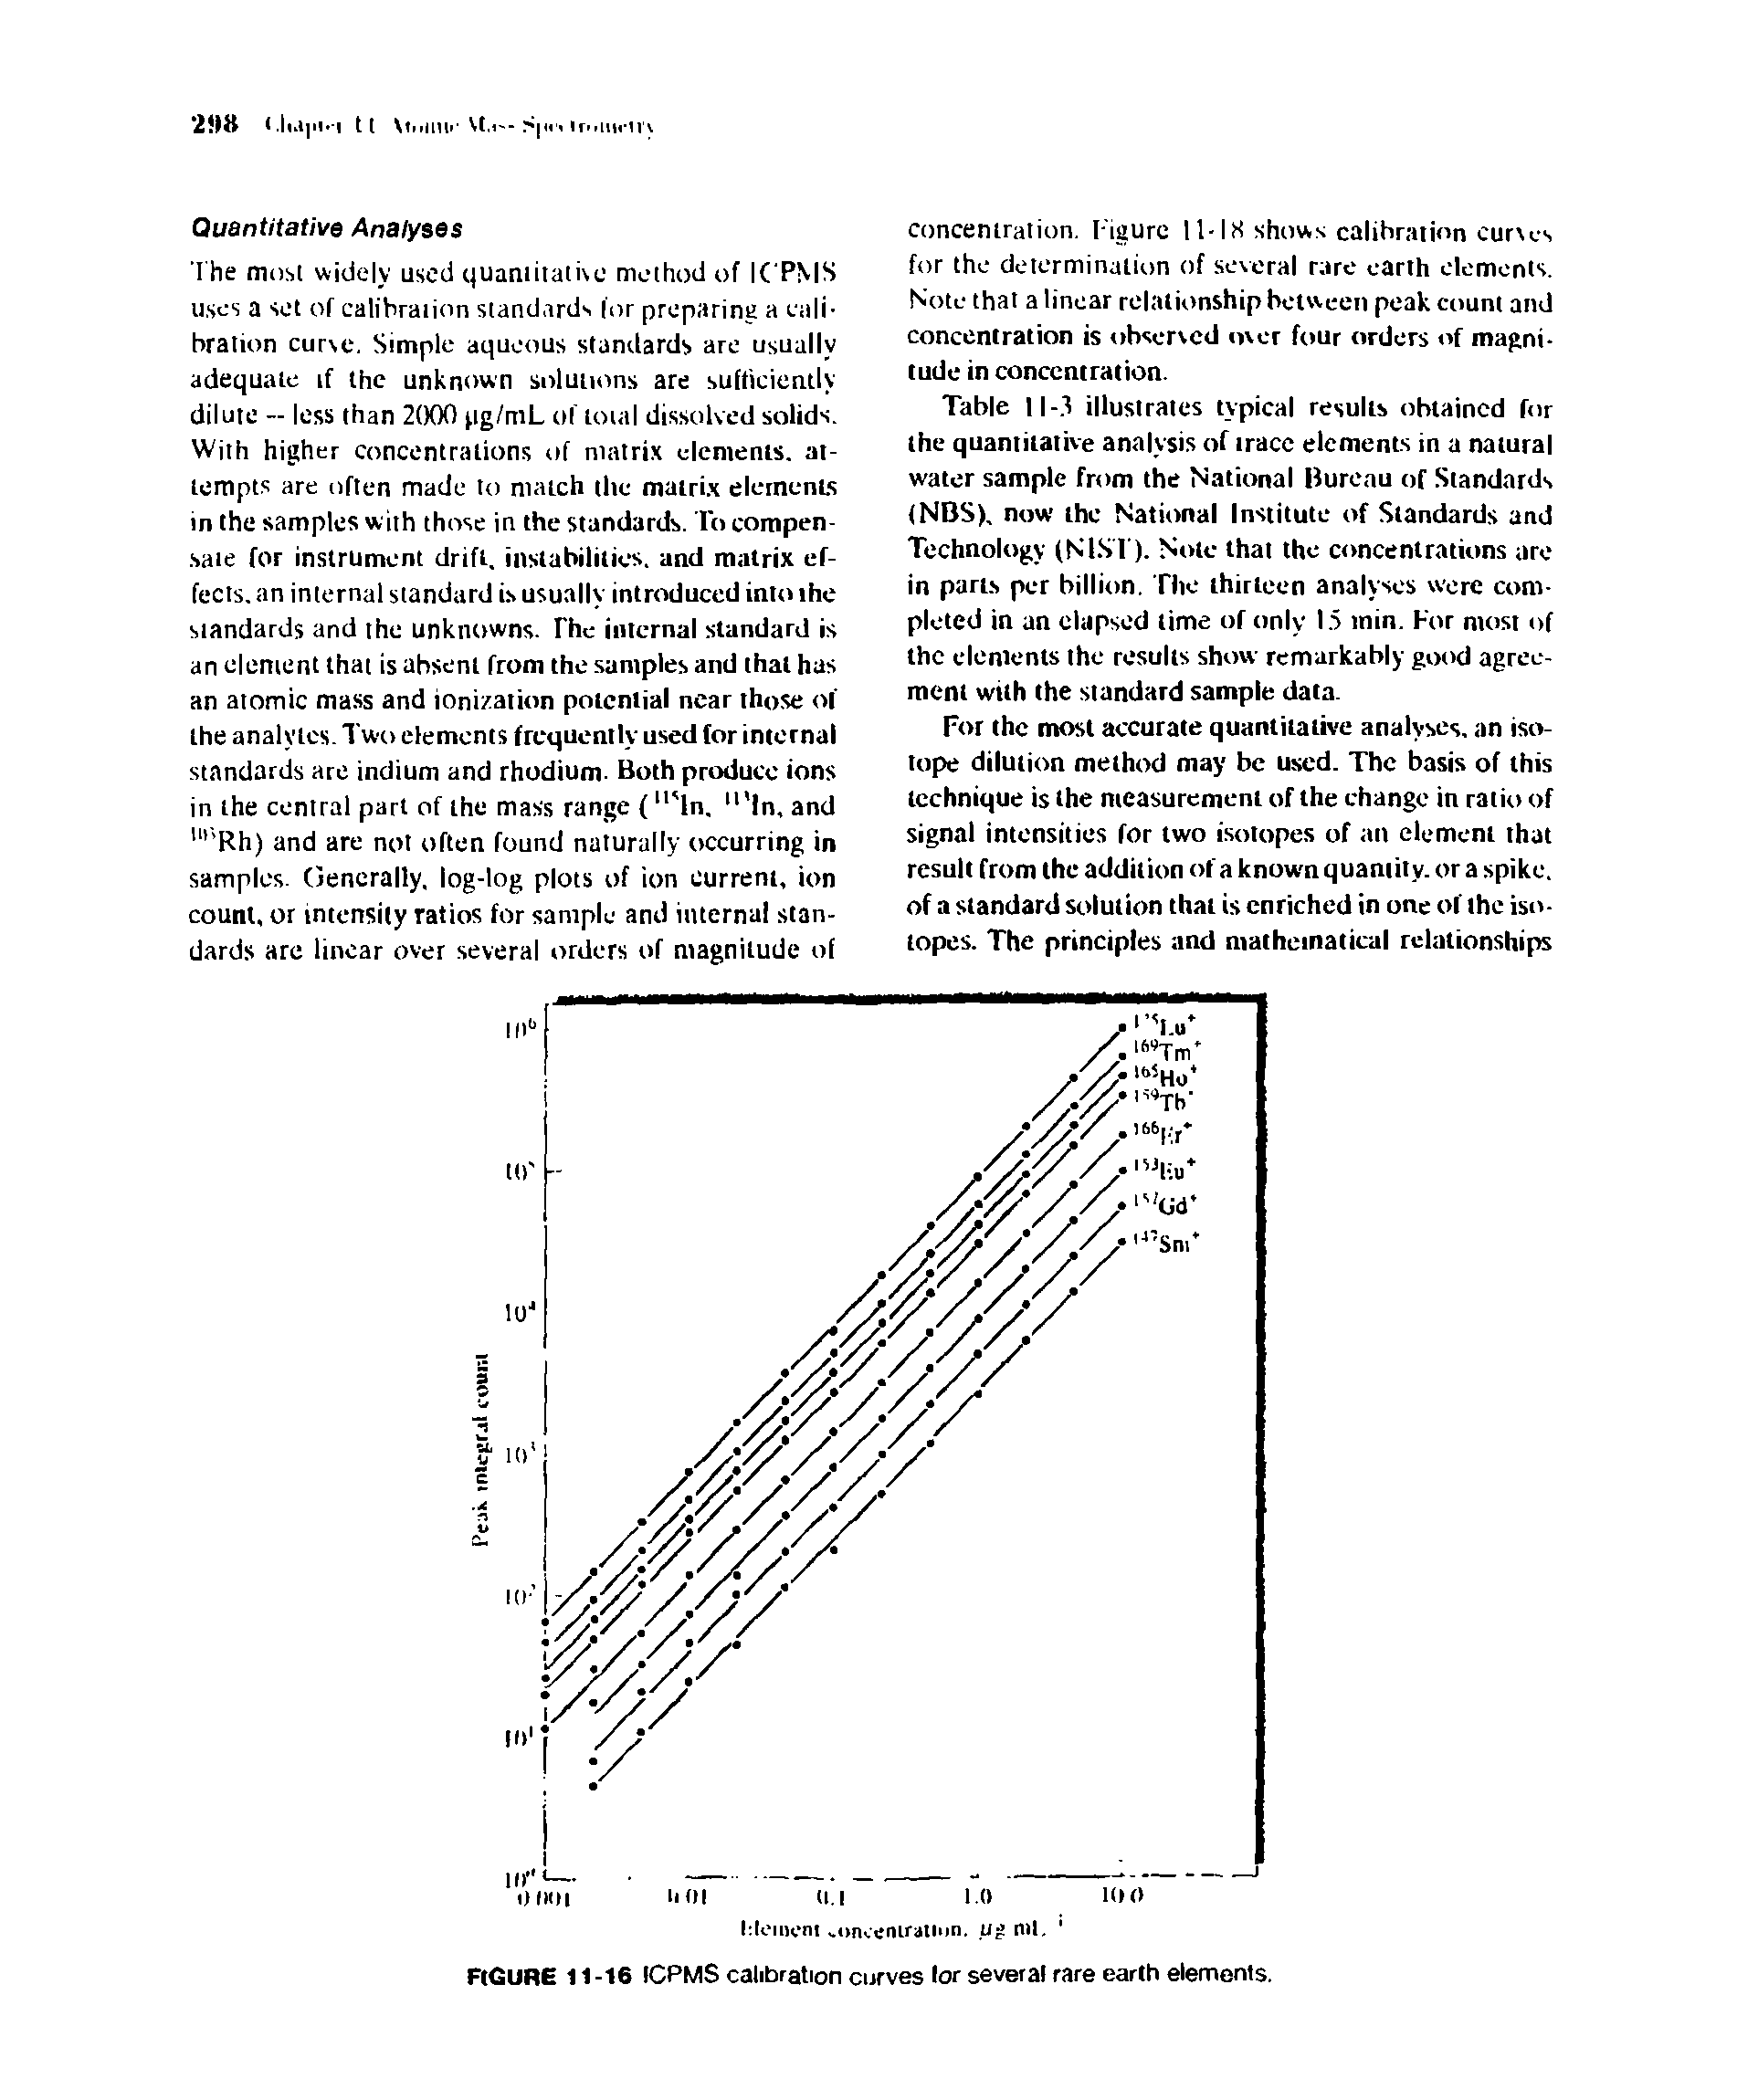 Table II-.1 illustrates typical results obtained for the quantitative analysis of trace elements in a natural water sample from the National Bureau of Standards (NBS), now the National Institute of Standards and Technology (Nl.Sl ). Note that the concentrations are in parts per billion. The thirteen analyses were completed in an elapsed time of only 1.5 min. For most of the elements the results show remarkably good agreement with the standard sample data.